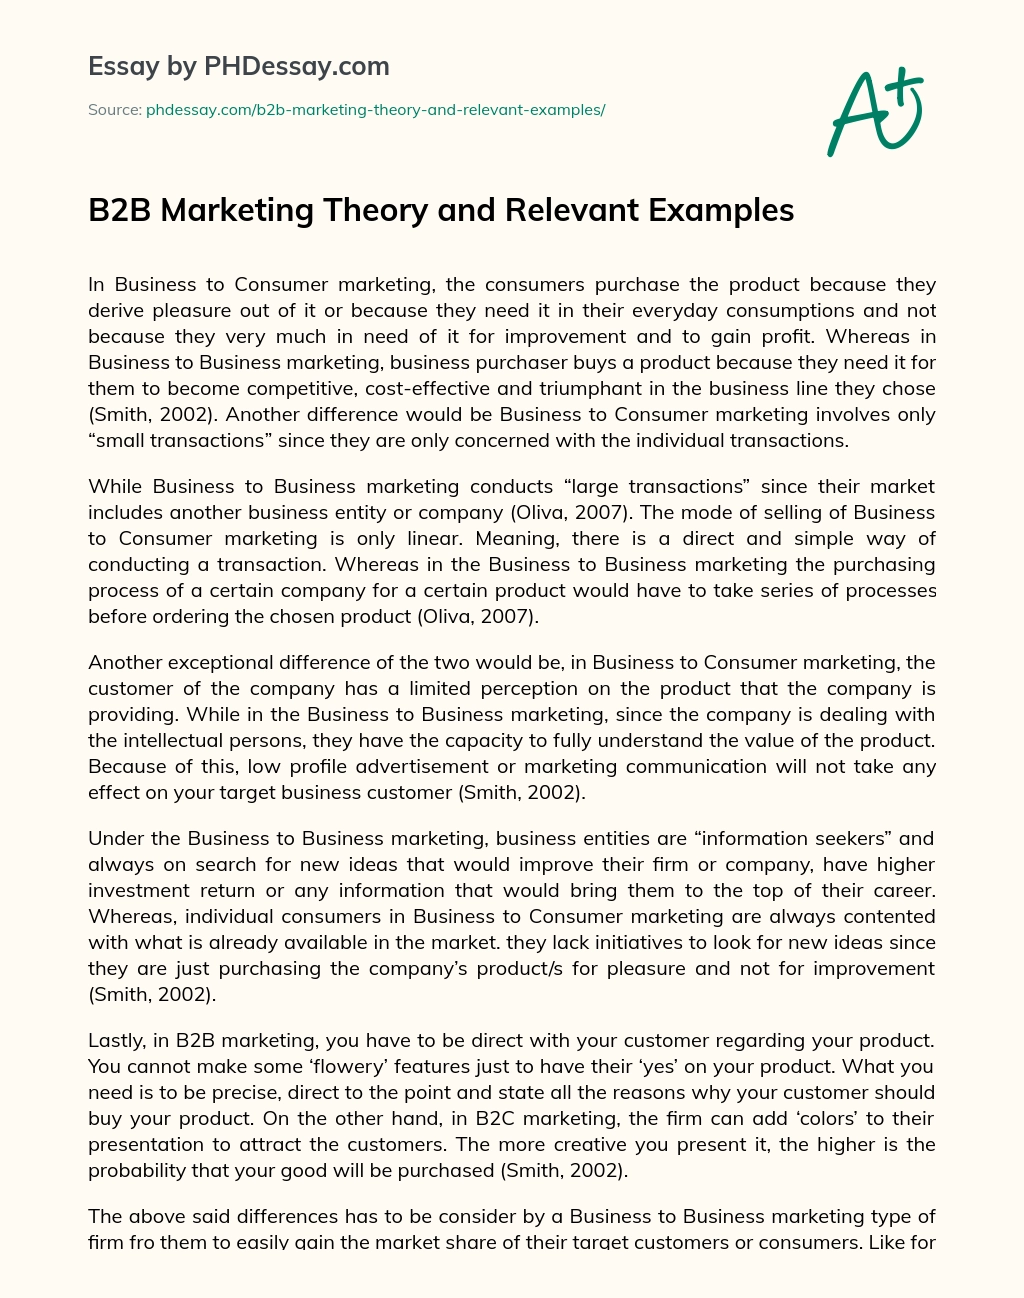 B2B Marketing Theory and Relevant Examples essay